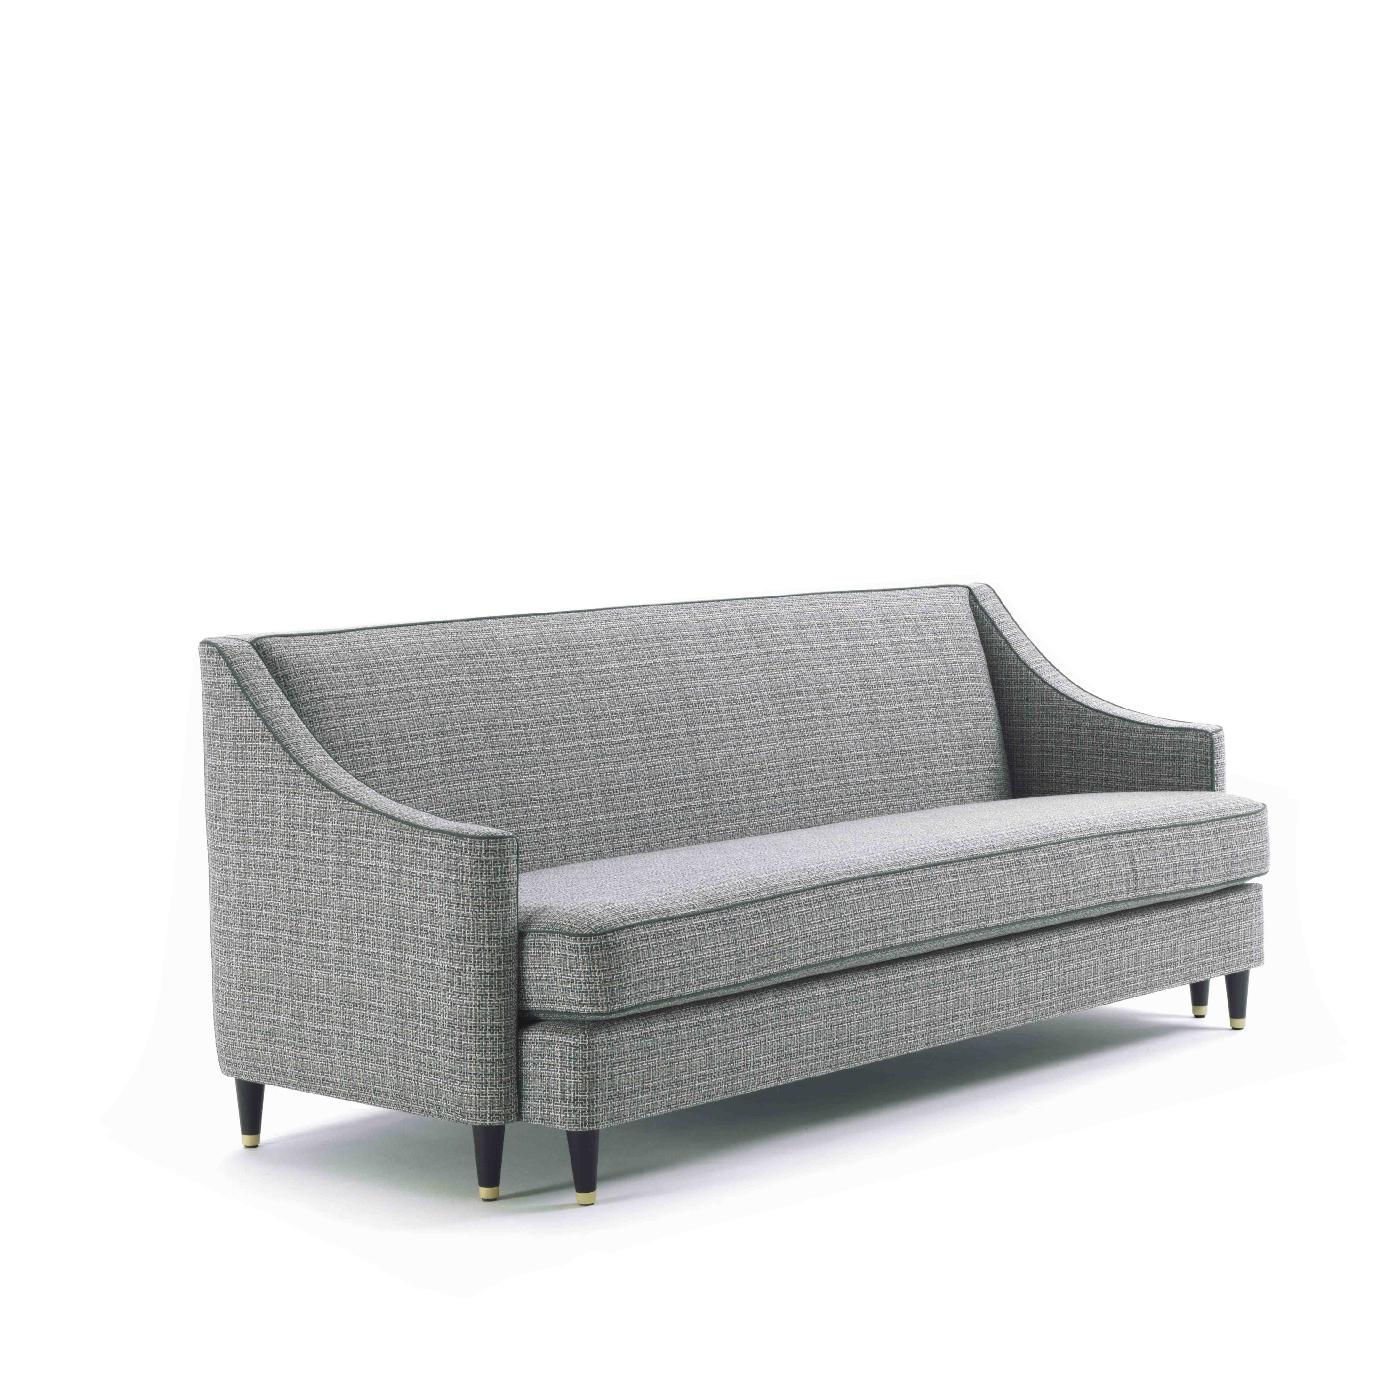 Perfectly proportioned and exquisitely detailed, this sofa will take center stage in any living room with its streamlined silhouette and refined upholstery. Fashioned of sturdy plywood and solid wood structure padded with polyurethane foam and